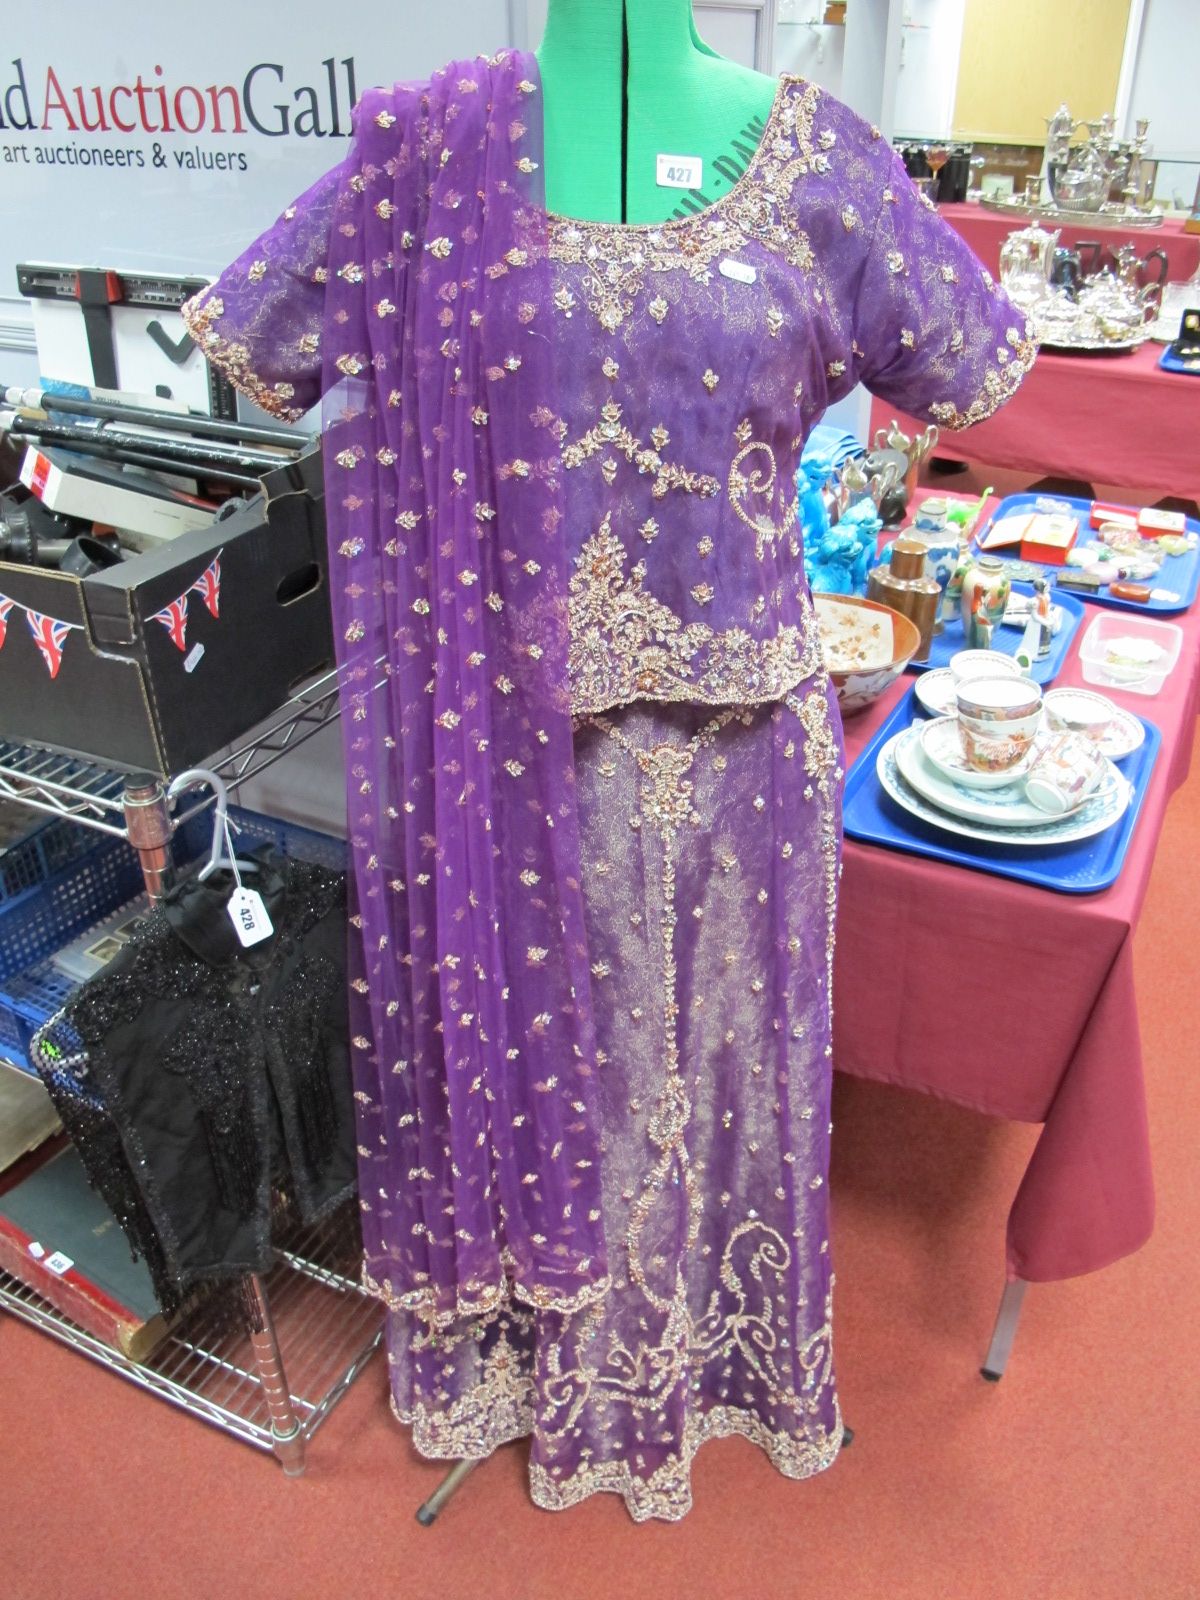 An Indian Lady's Three Piece Bridal Gown, decoratively embellished with thread and sequins.